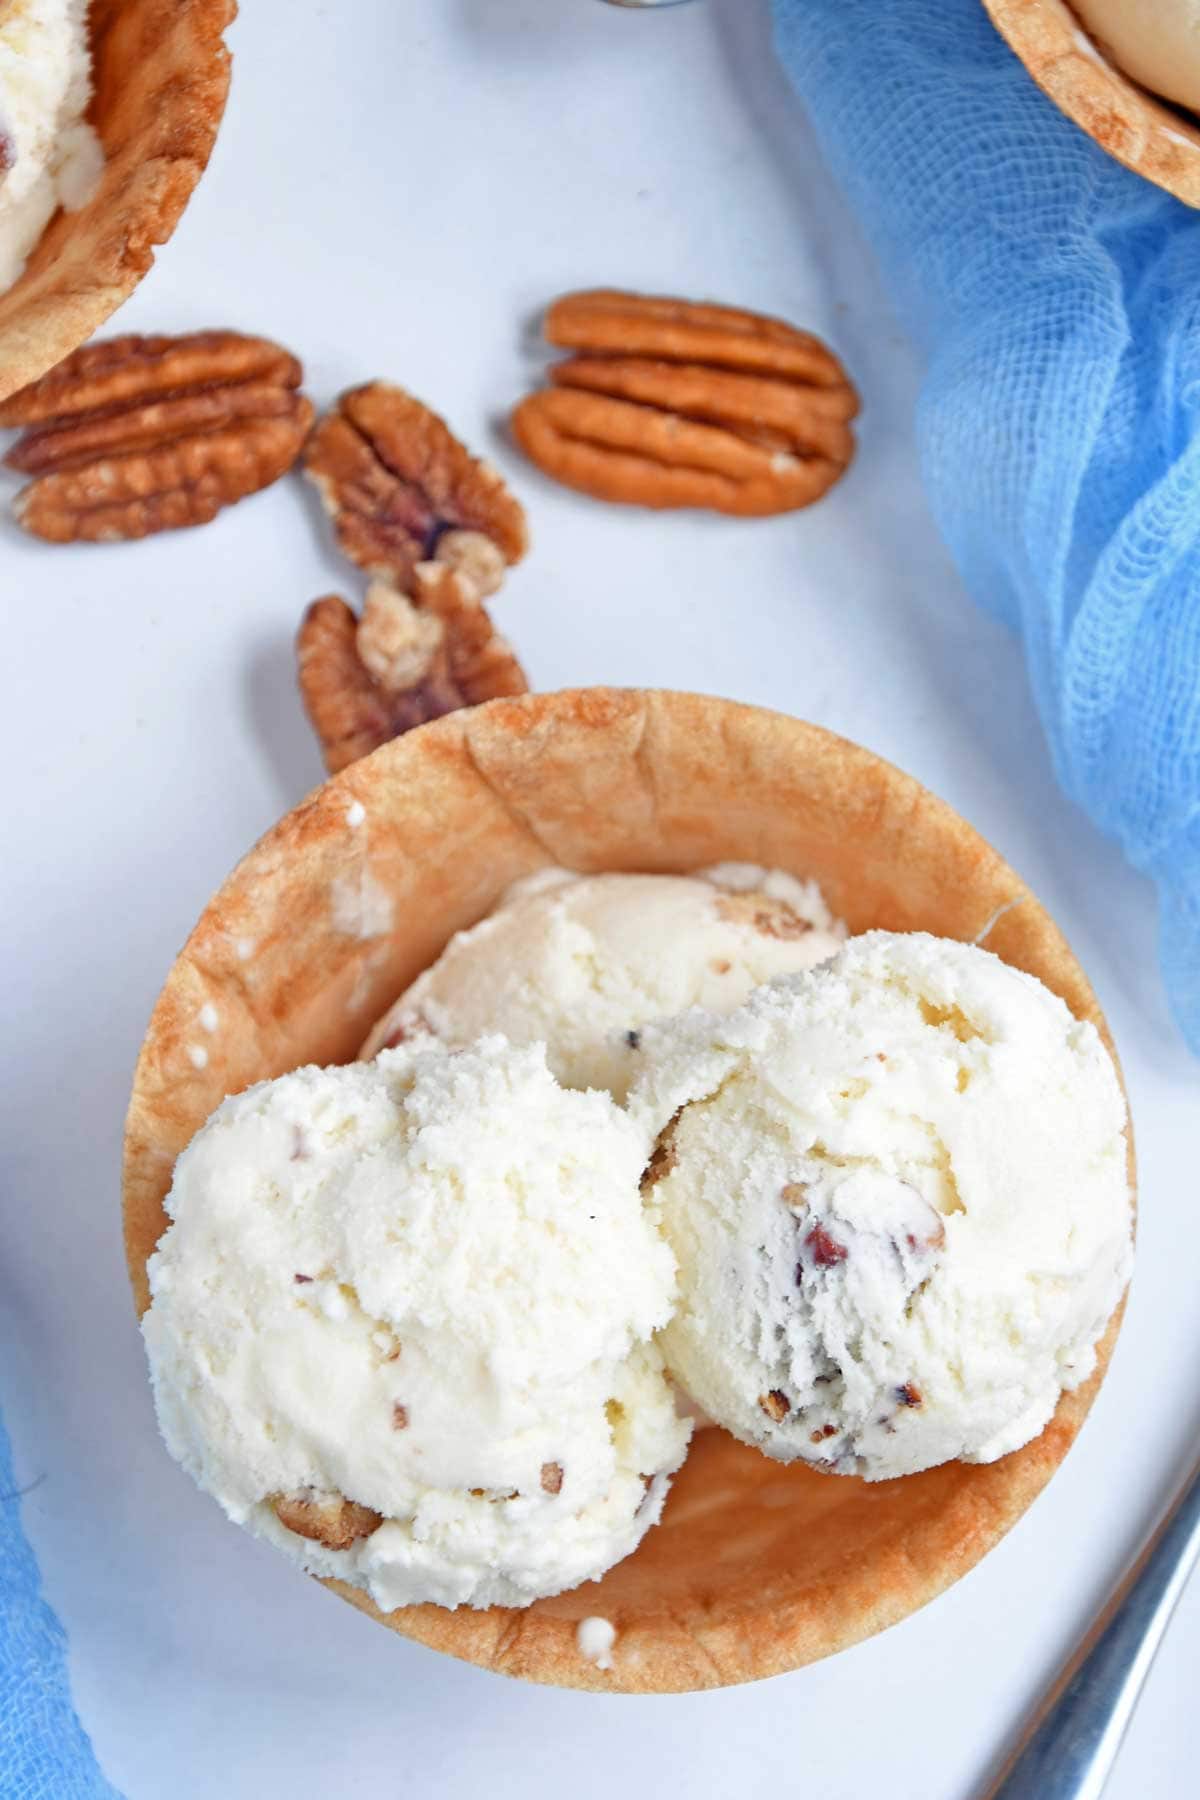 Butter Pecan ice cream scoops in a waffle cup.